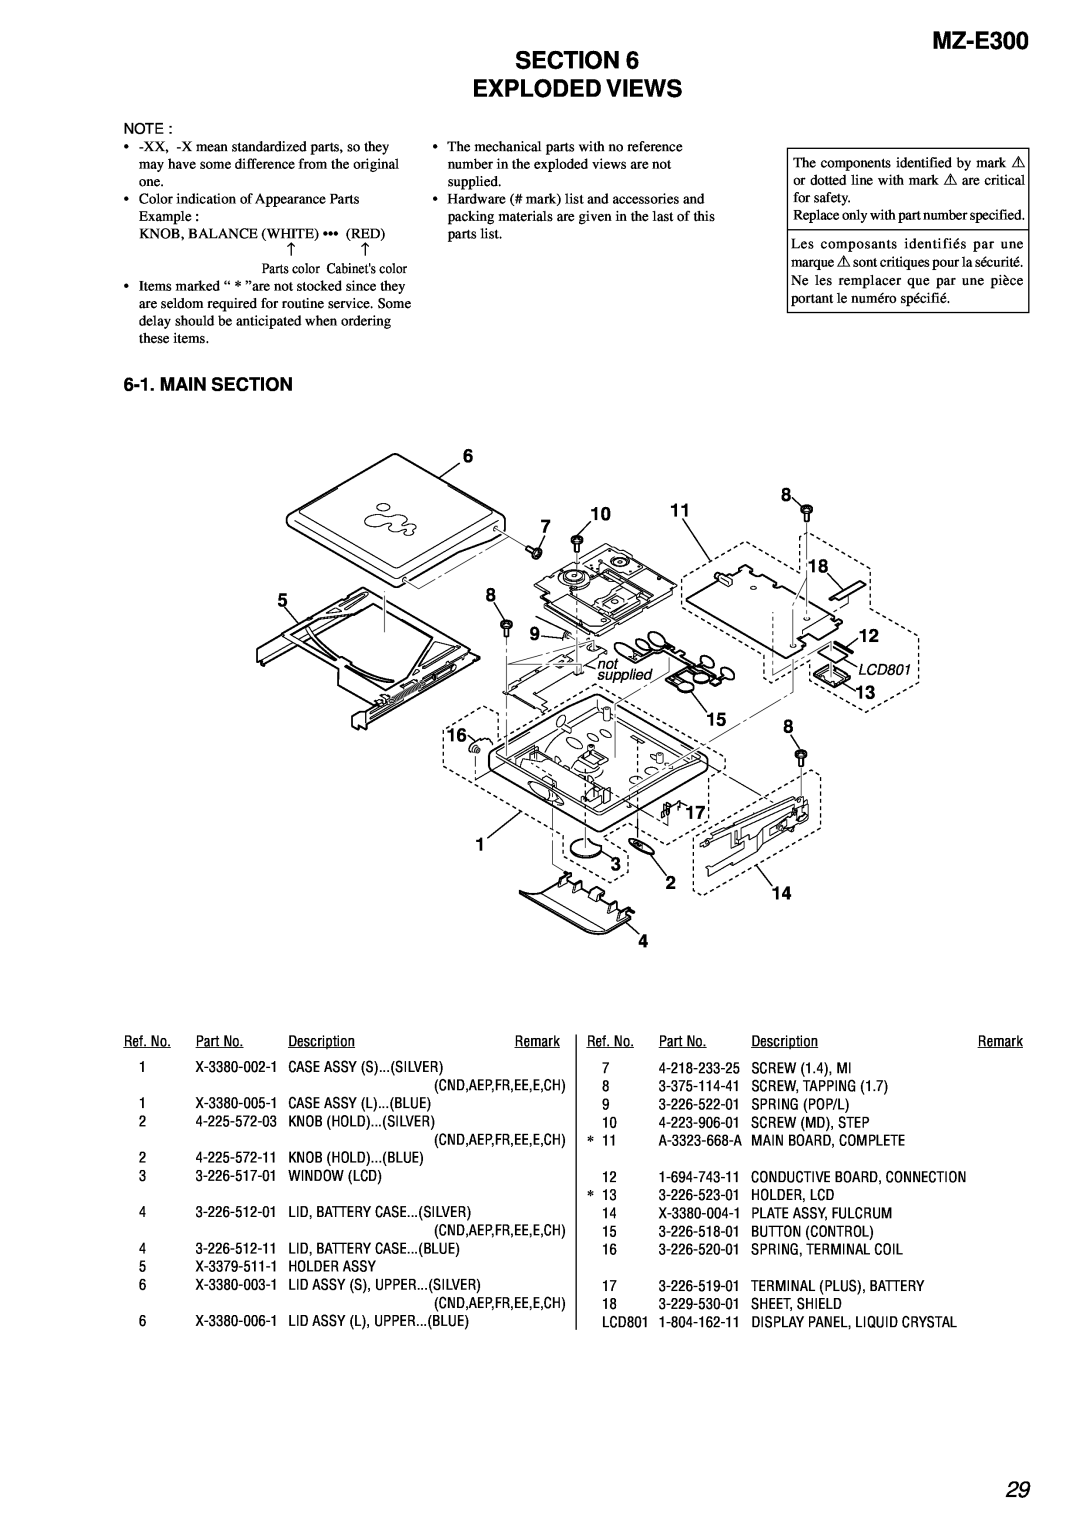 Sony MZ-300 specifications Section Exploded Views, Main Section, MZ-E300 